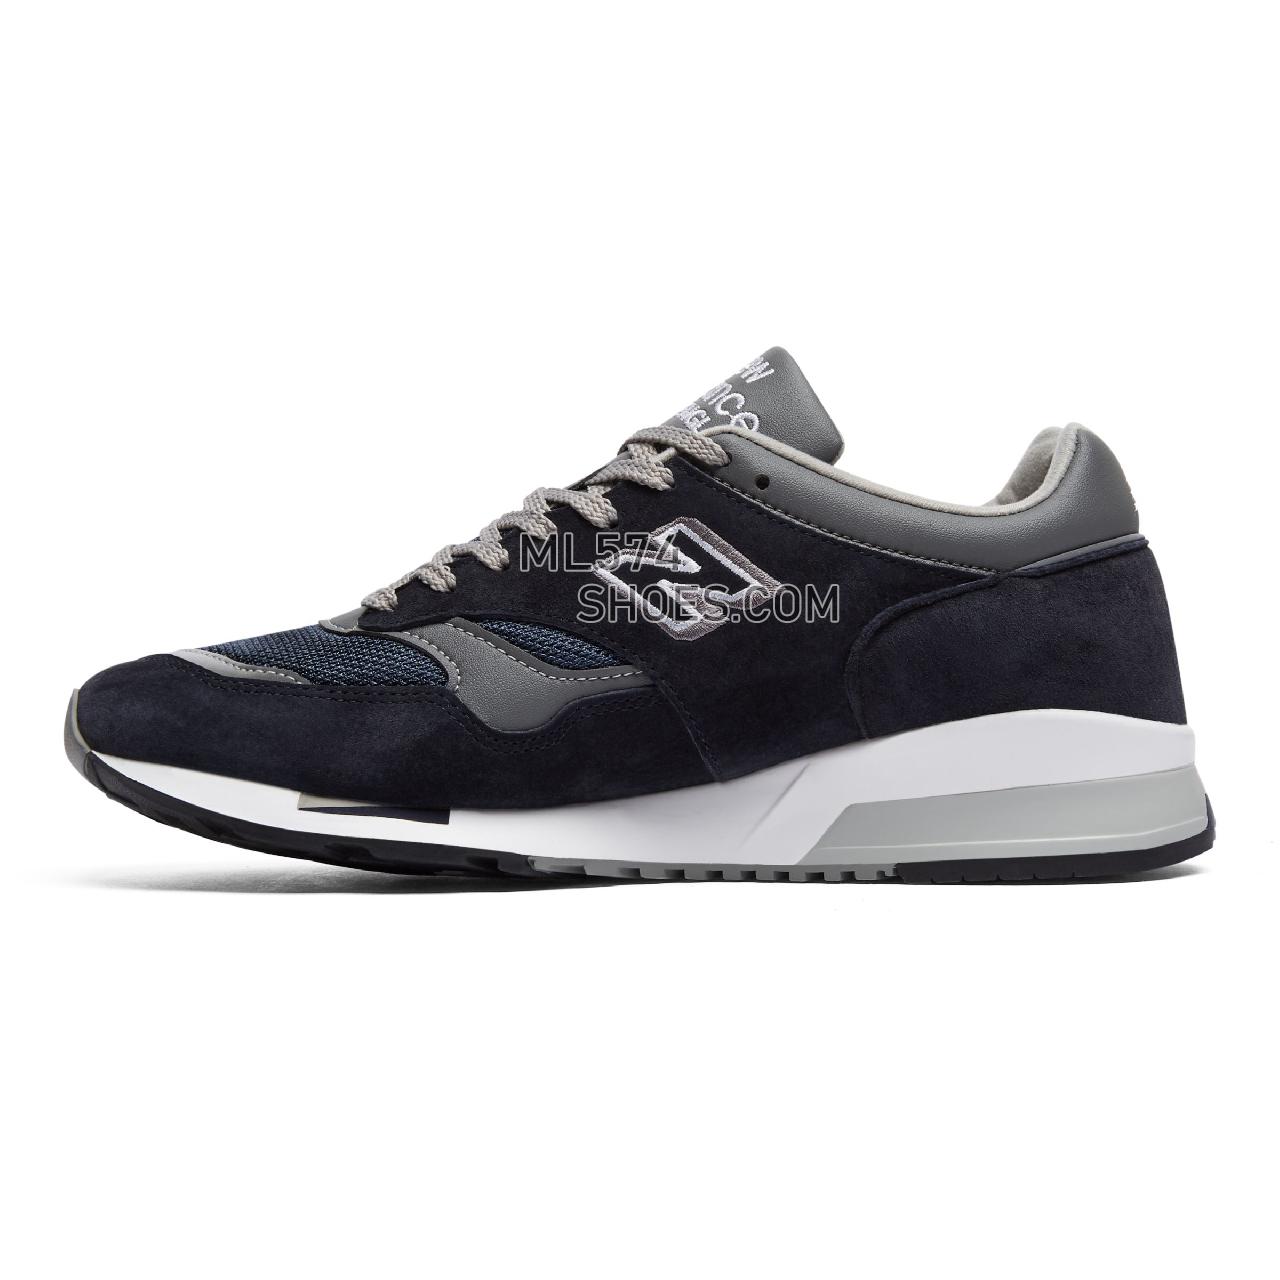 New Balance Made in UK 1500 - Men's Made in UK 1500 Classic - Navy with Grey and White - M1500PNV